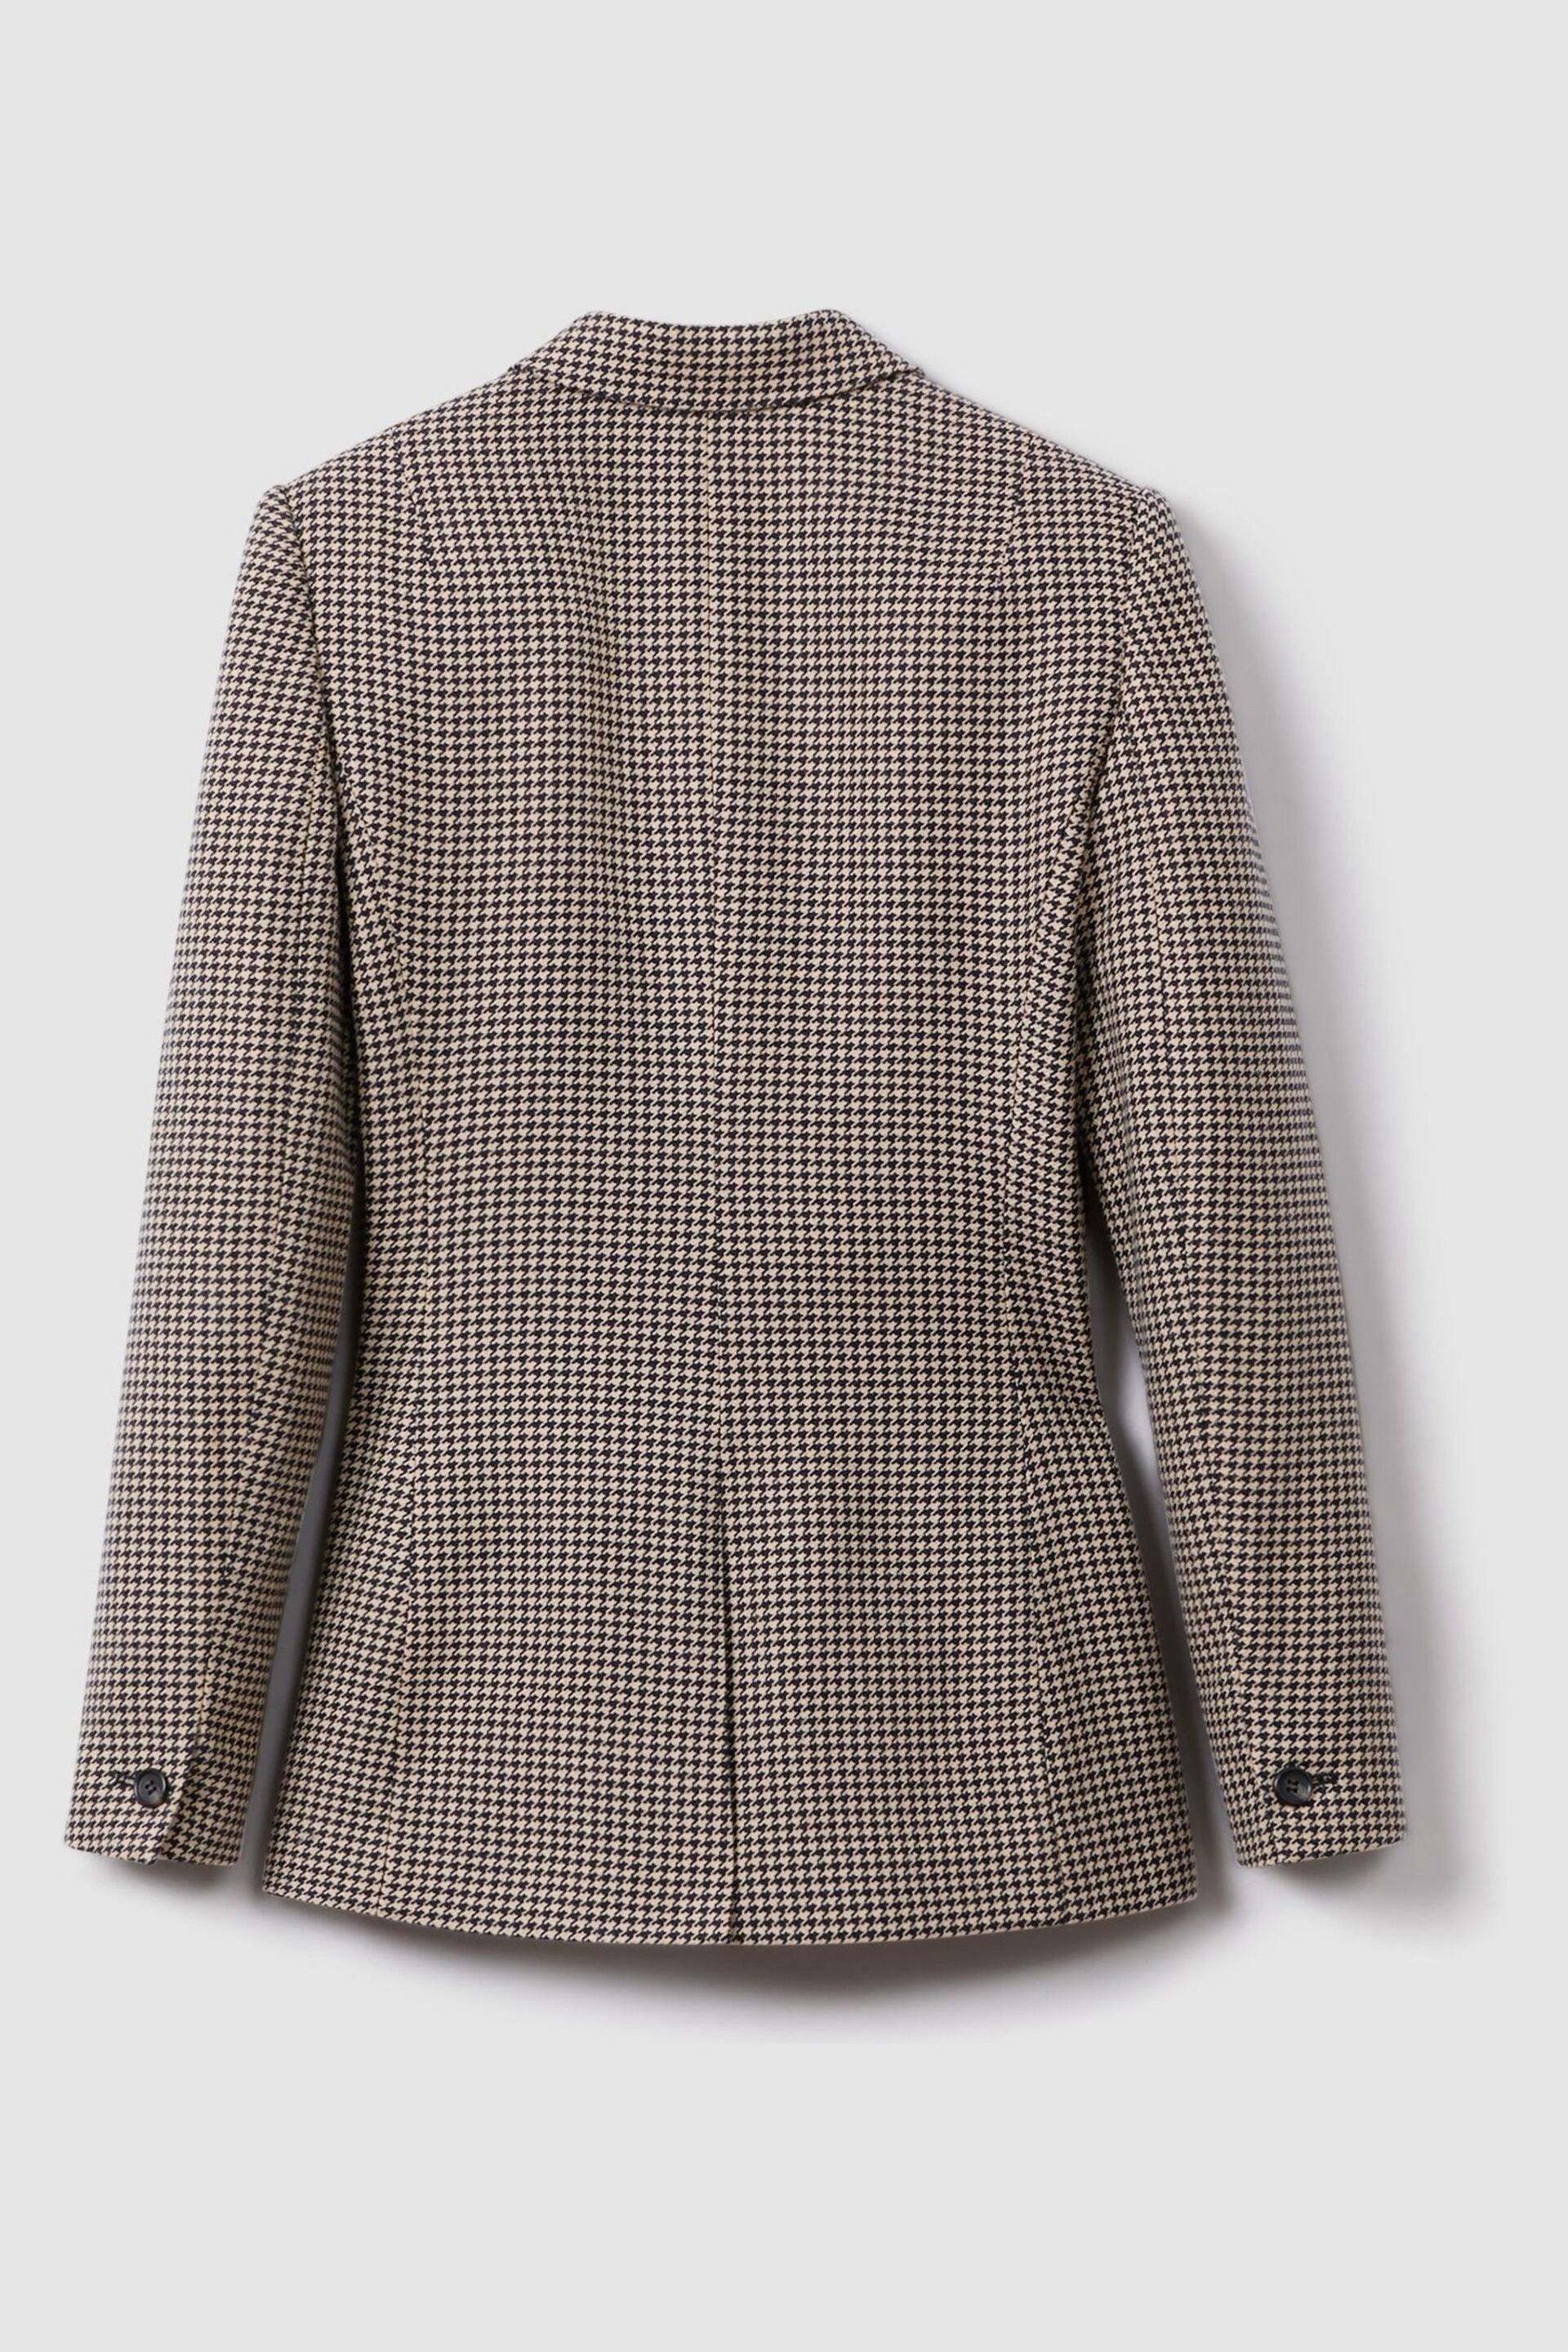 Reiss Black/Camel Ella Wool Blend Double Breasted Dogtooth Blazer - Image 4 of 5